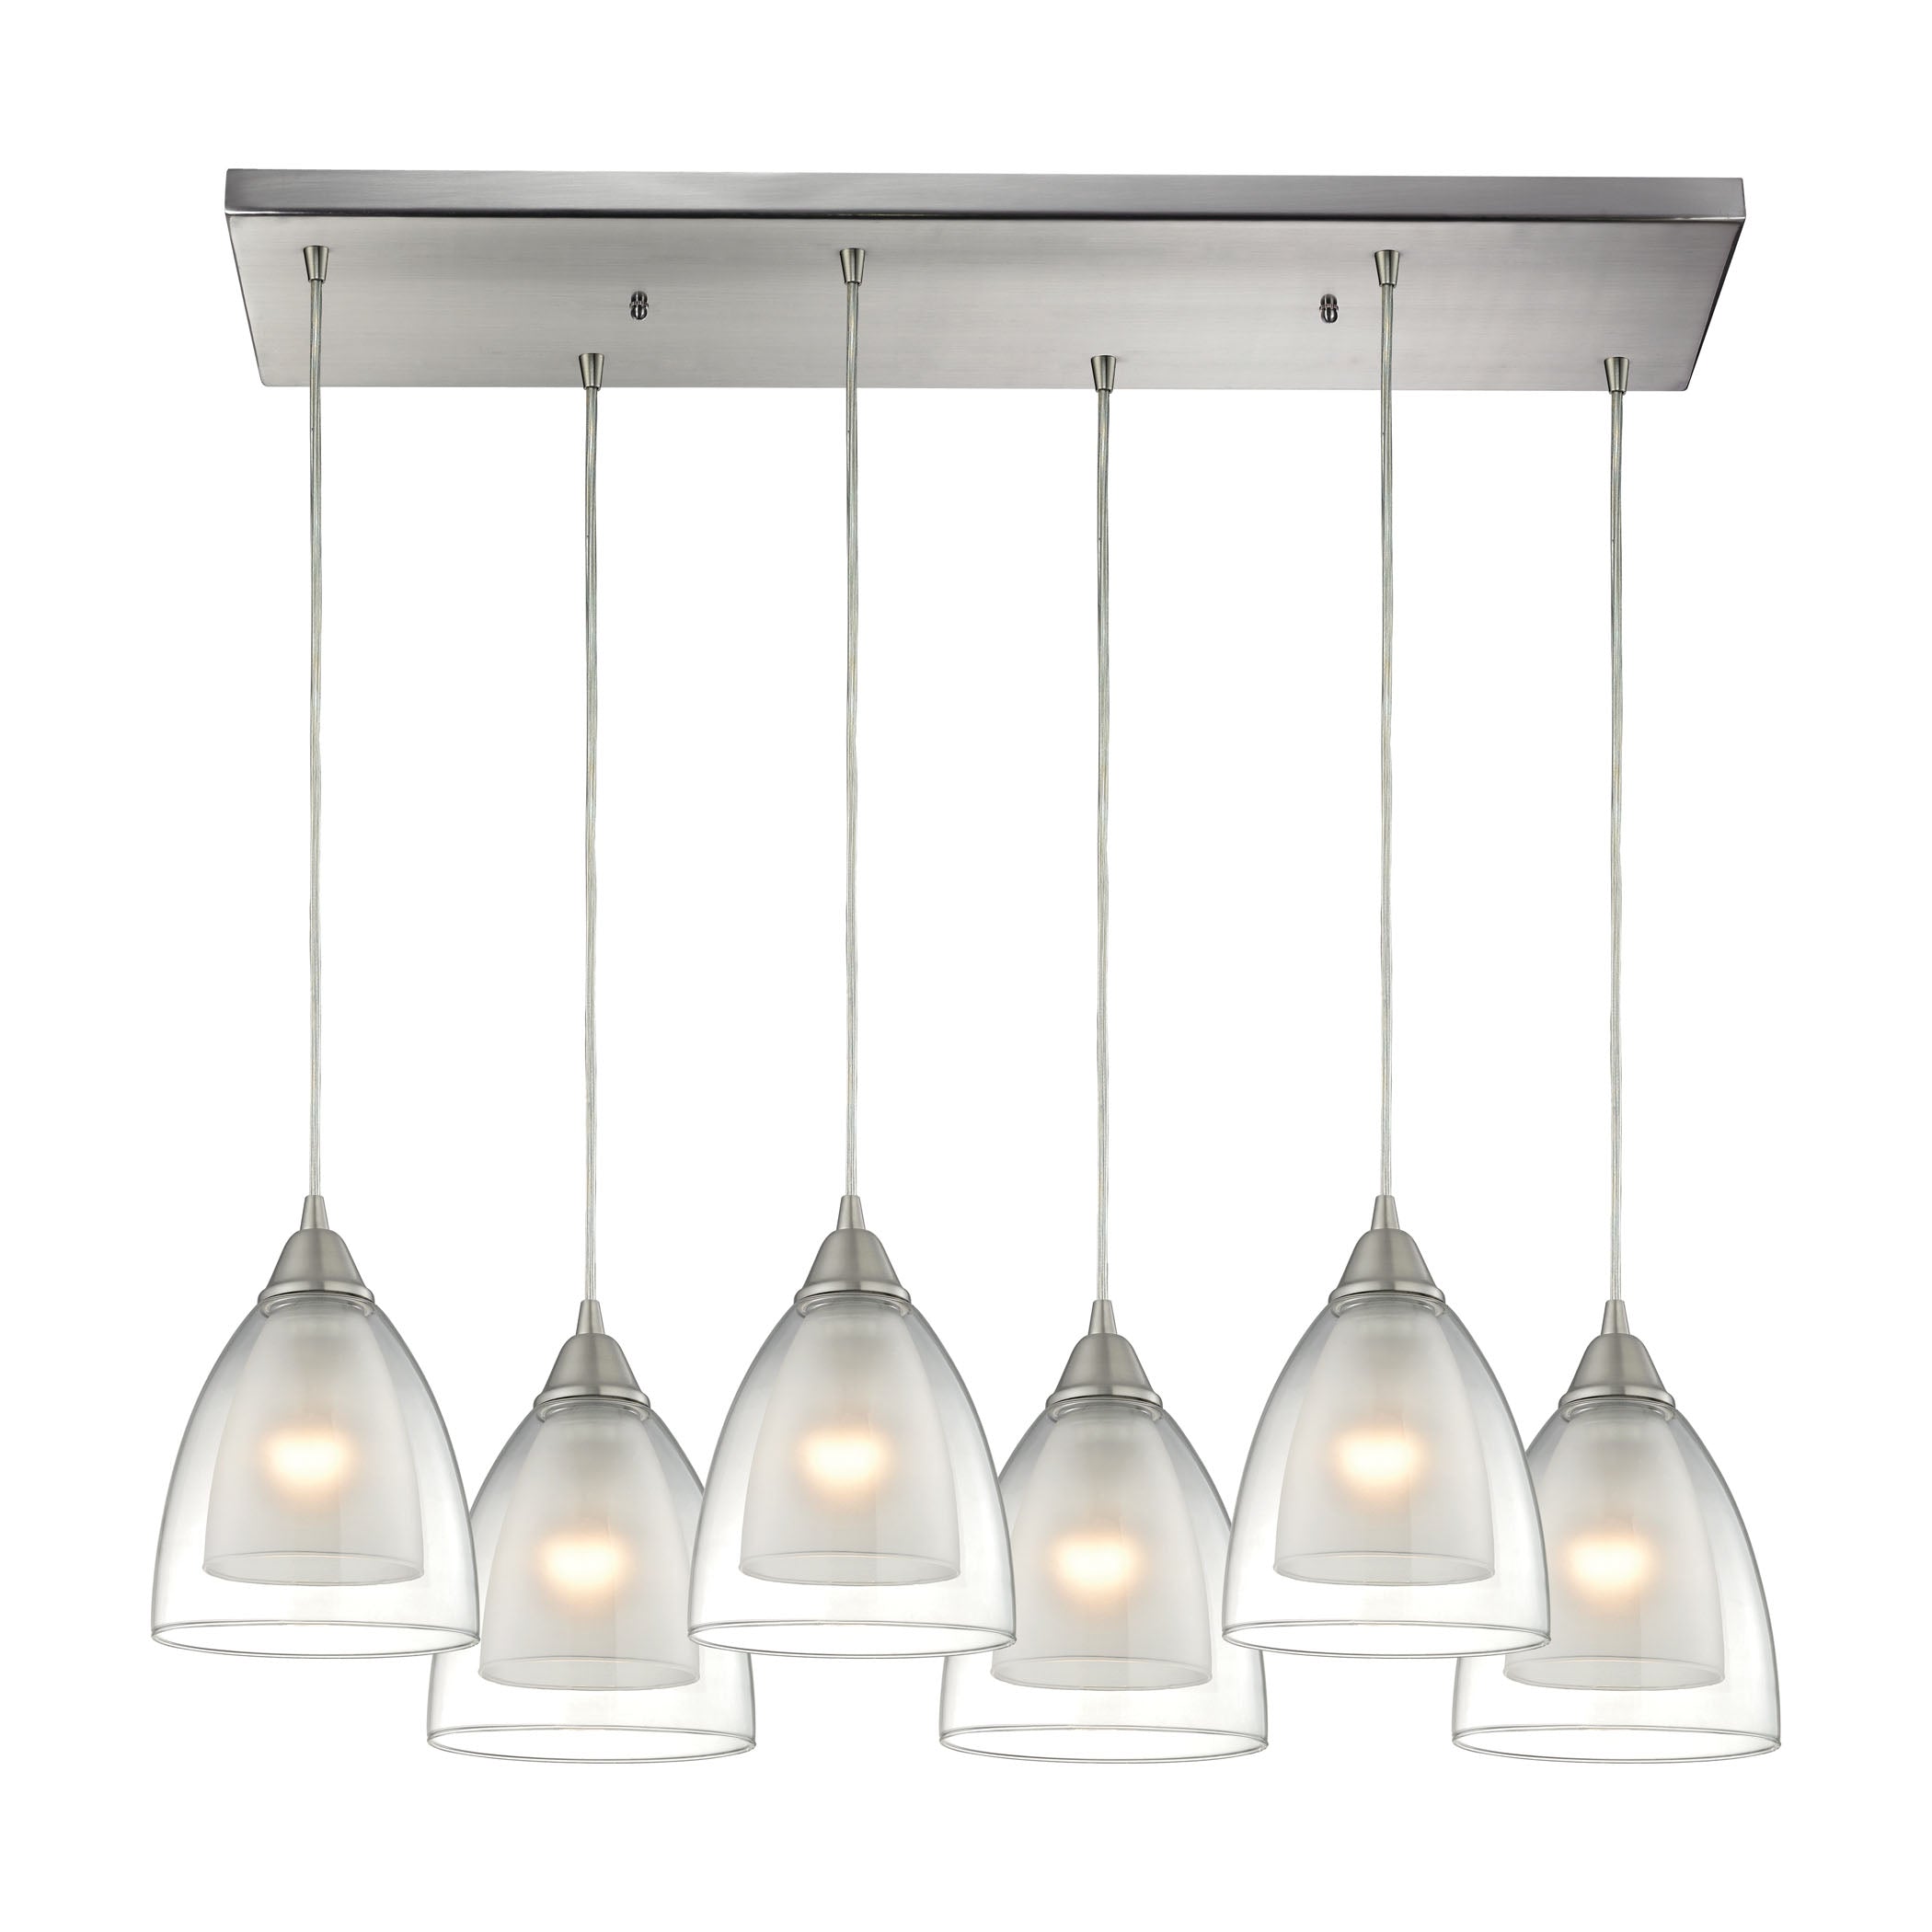 ELK Lighting 10464/6RC Layers 6-Light Rectangular Pendant Fixture in Satin Nickel with Clear Glass